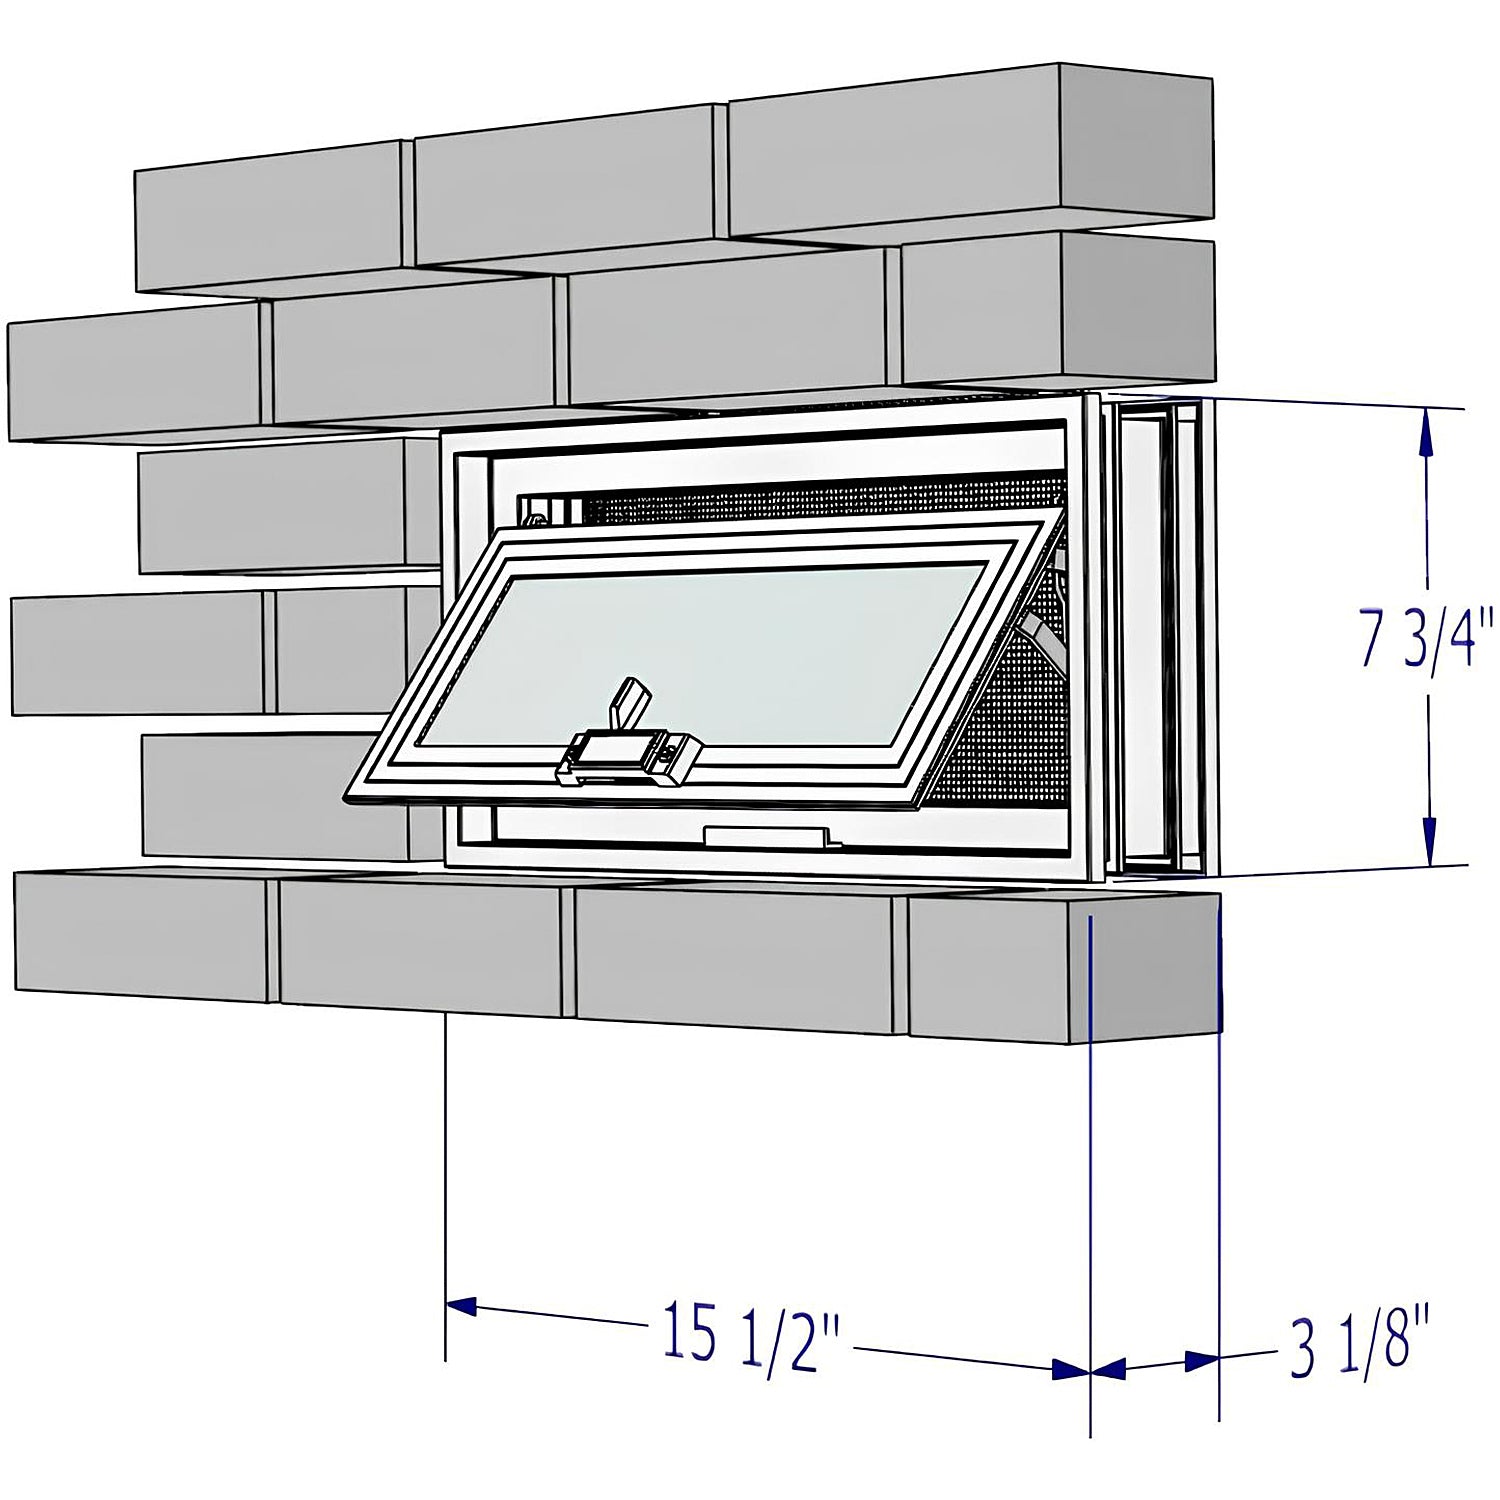 Dimensions of foundation vent